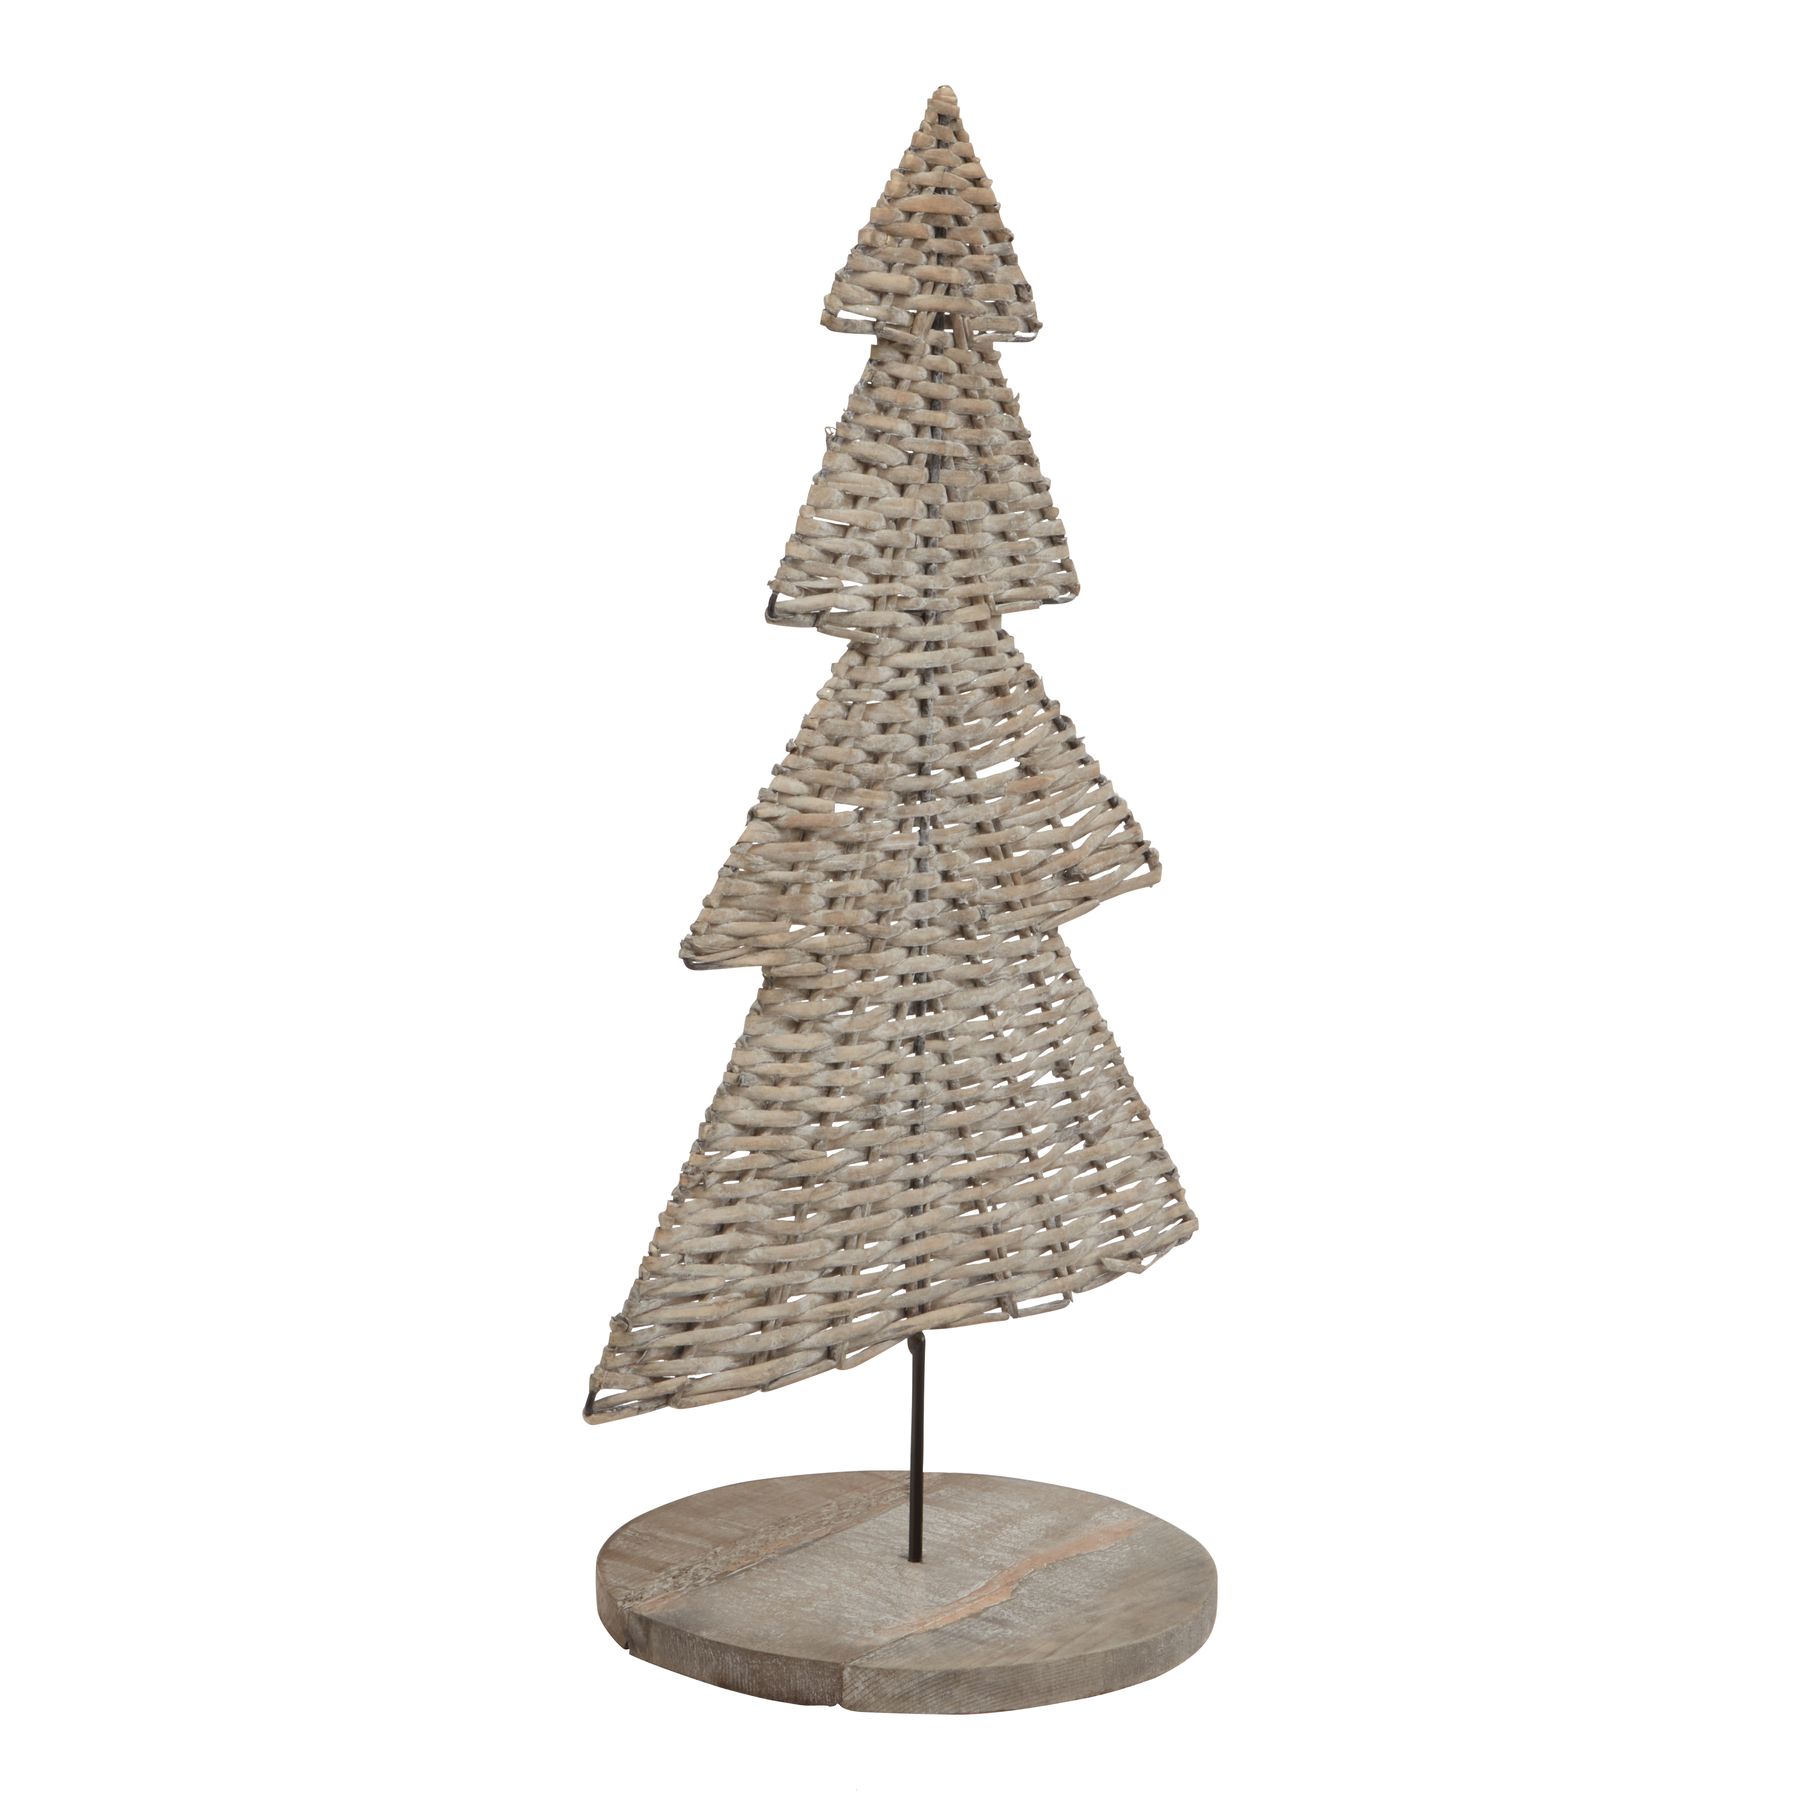 The Noel Collection Large Wicker Tree Ornament - Image 2